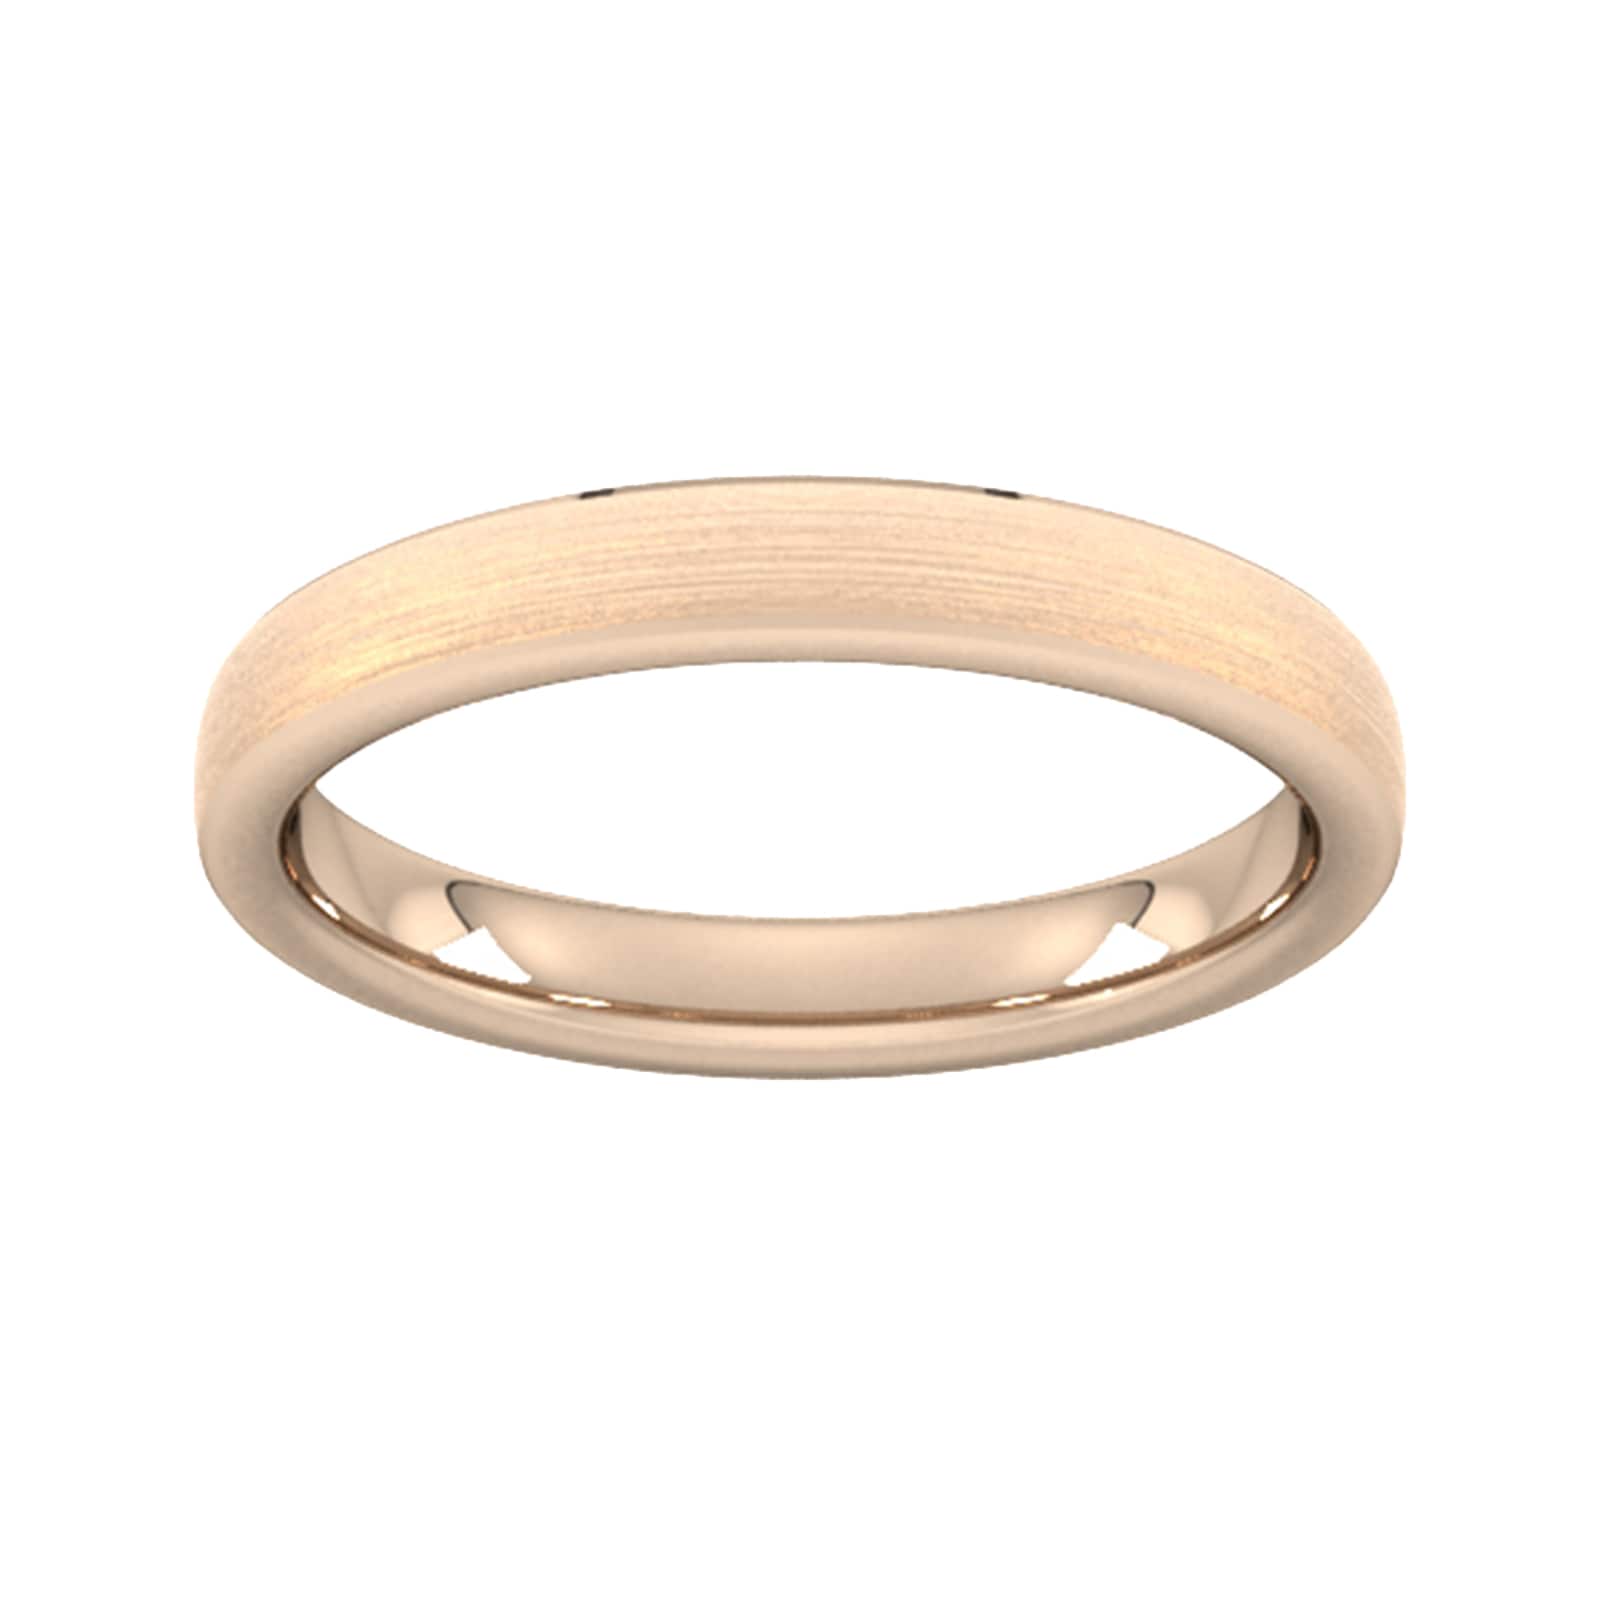 3mm Slight Court Standard Polished Chamfered Edges With Matt Centre Wedding Ring In 9 Carat Rose Gold - Ring Size N